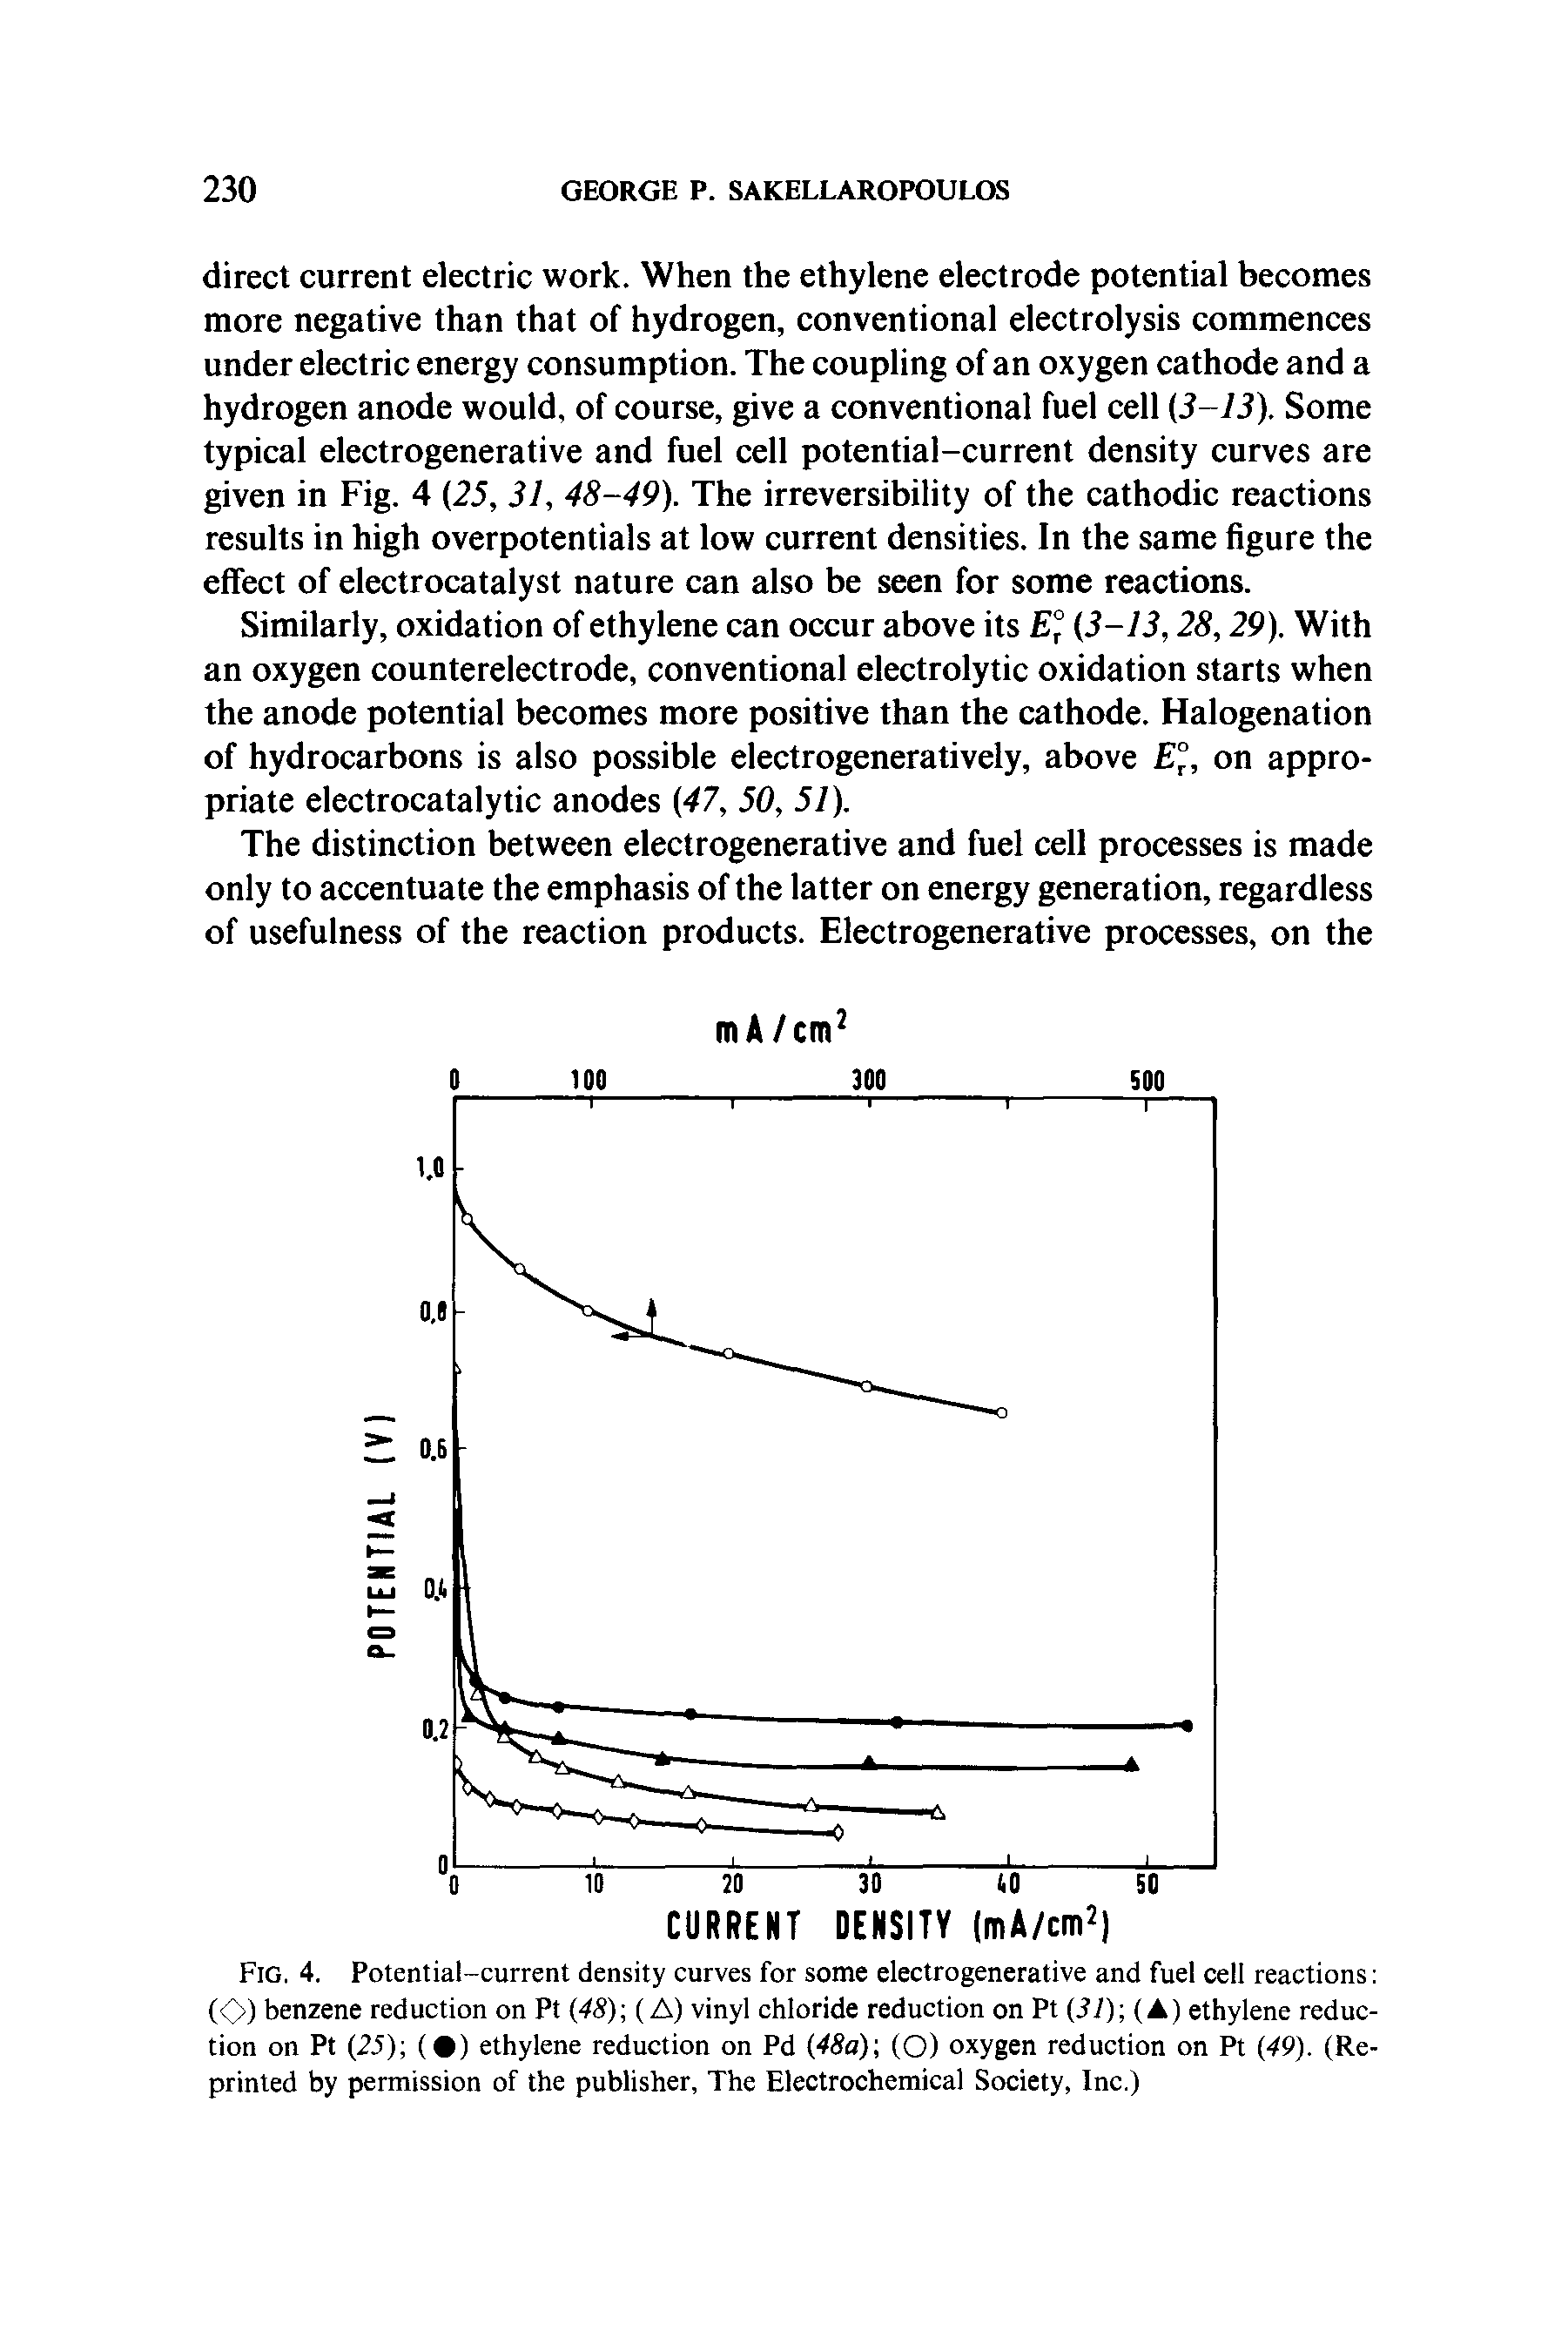 Fig. 4. Potential-current density curves for some electrogenerative and fuel cell reactions (O) benzene reduction on Pt (4S) (A) vinyl chloride reduction on Pt (31) (A) ethylene reduction on Pt (25) ( ) ethylene reduction on Pd (48a) (O) oxygen reduction on Pt (49). (Reprinted by permission of the publisher, The Electrochemical Society, Inc.)...